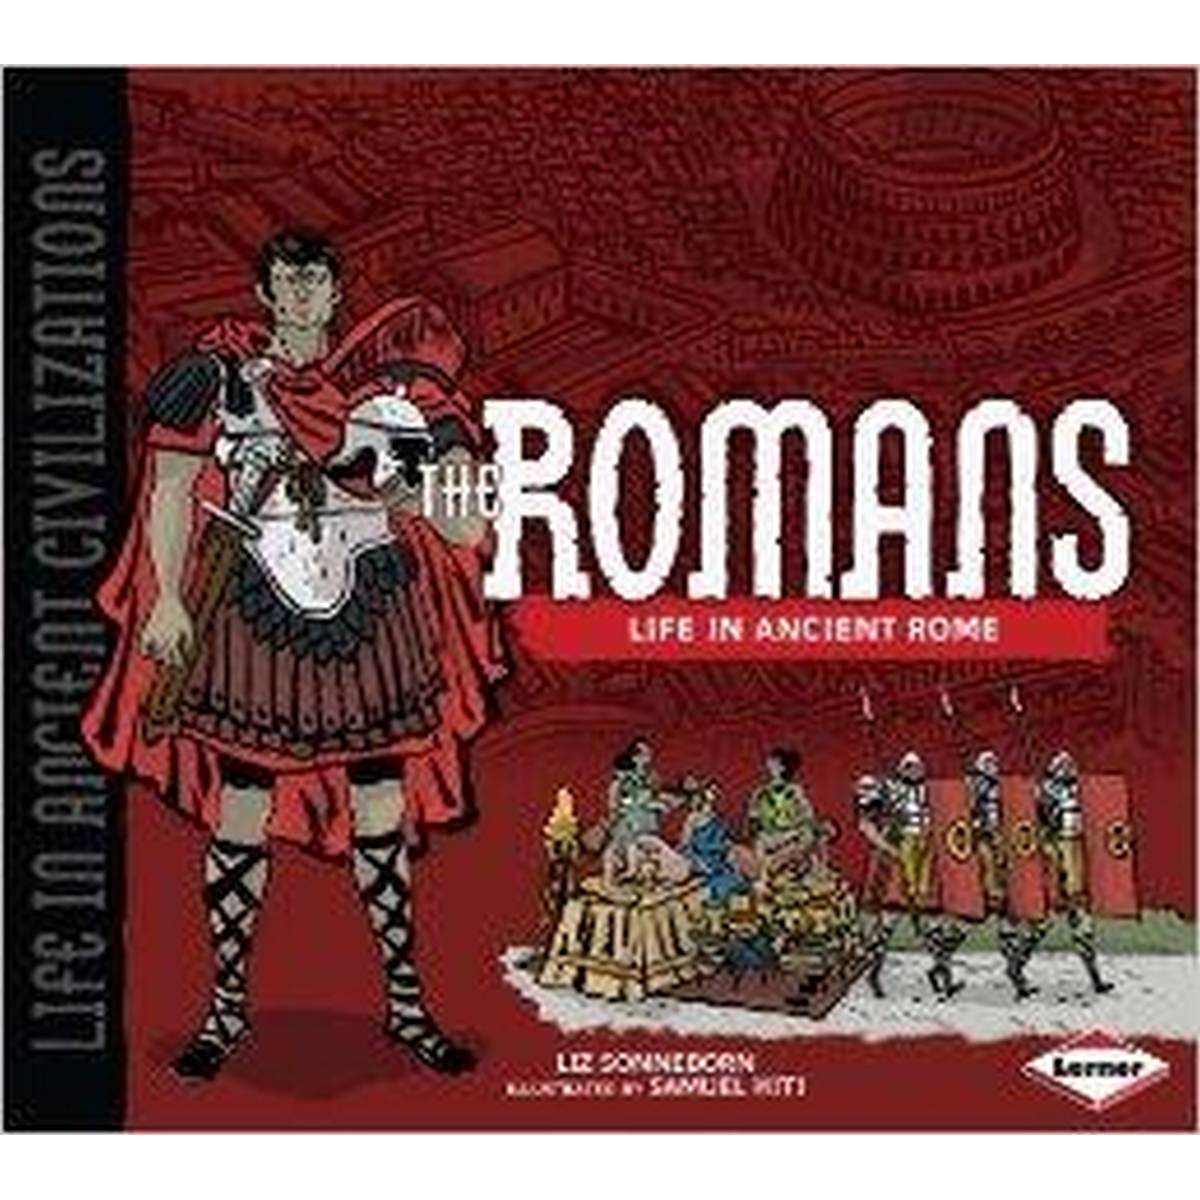 The Romans: Life in Ancient Rome